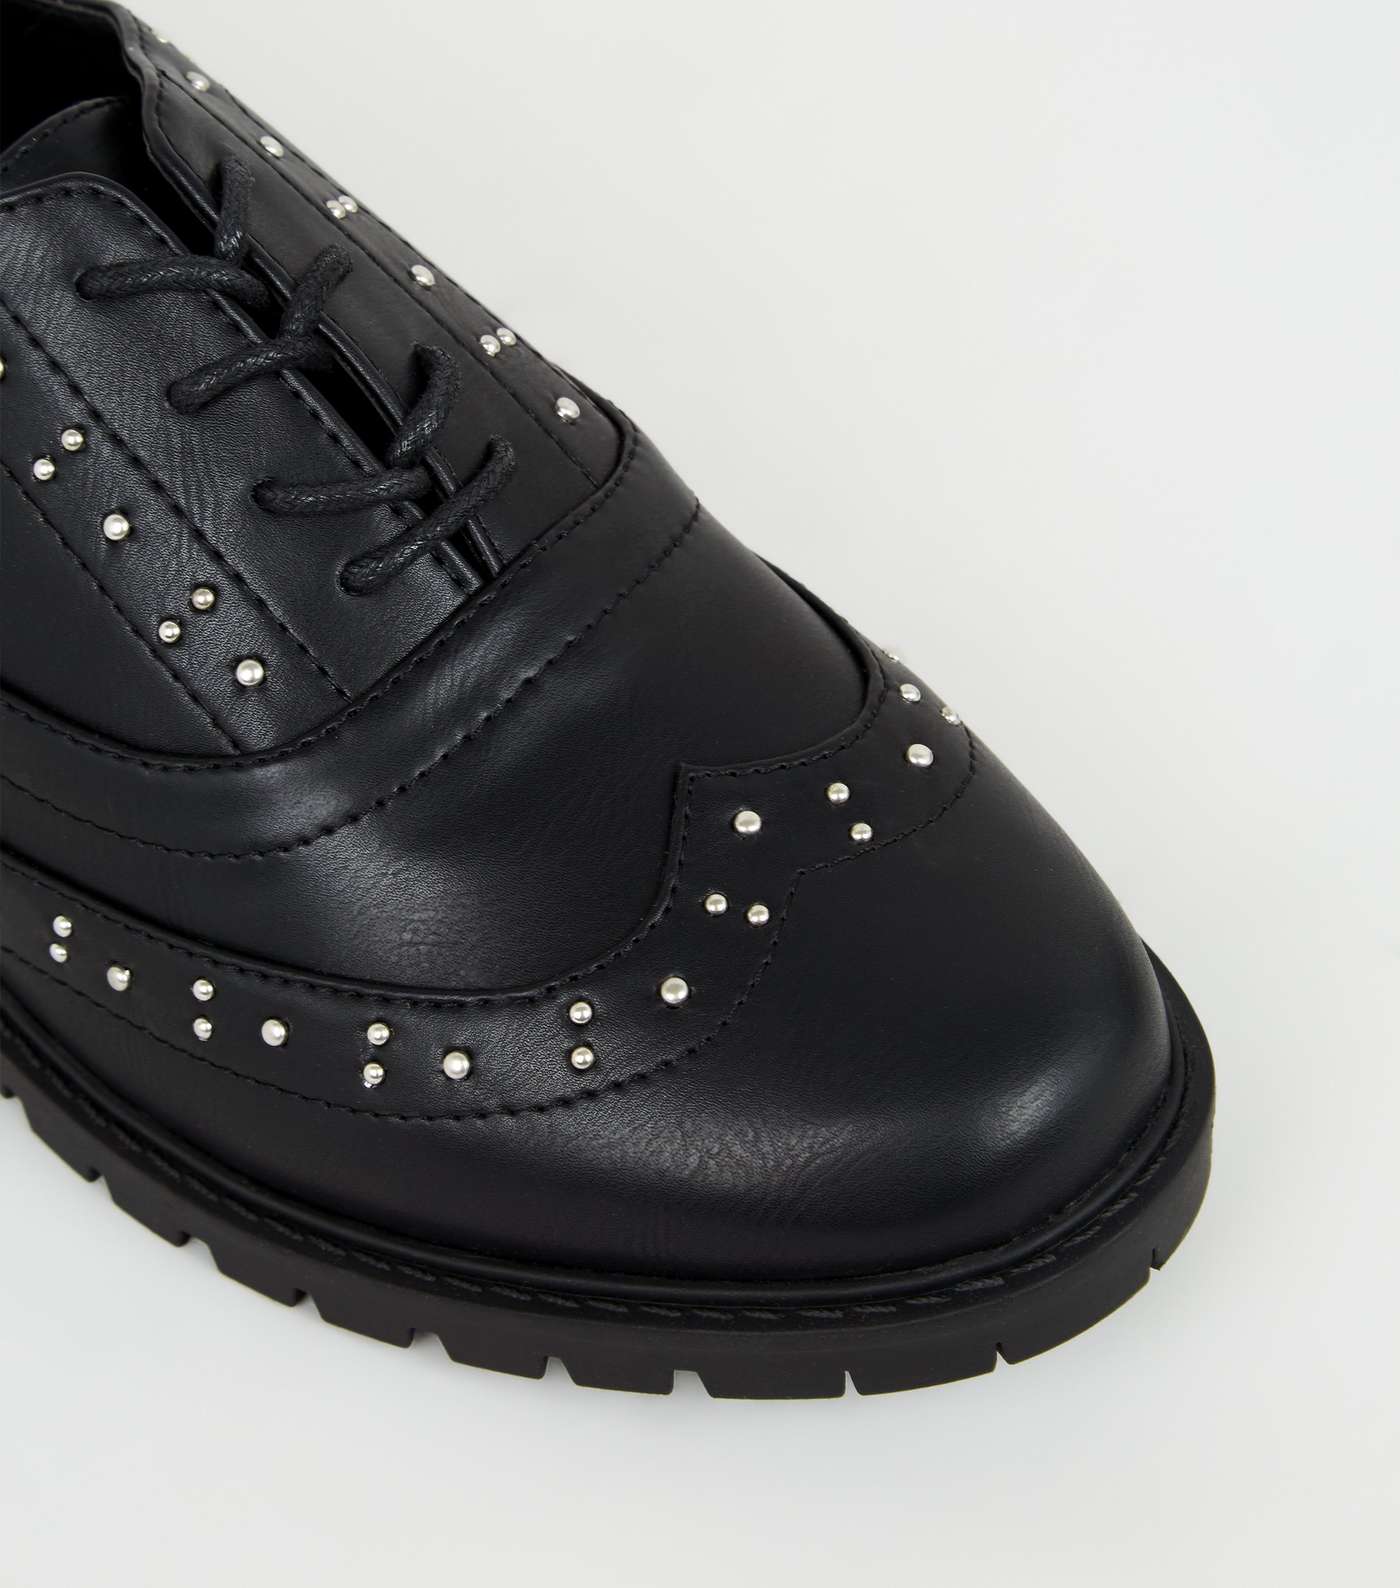 Wide Fit Black Leather-Look Studded Lace Up Shoes Image 4